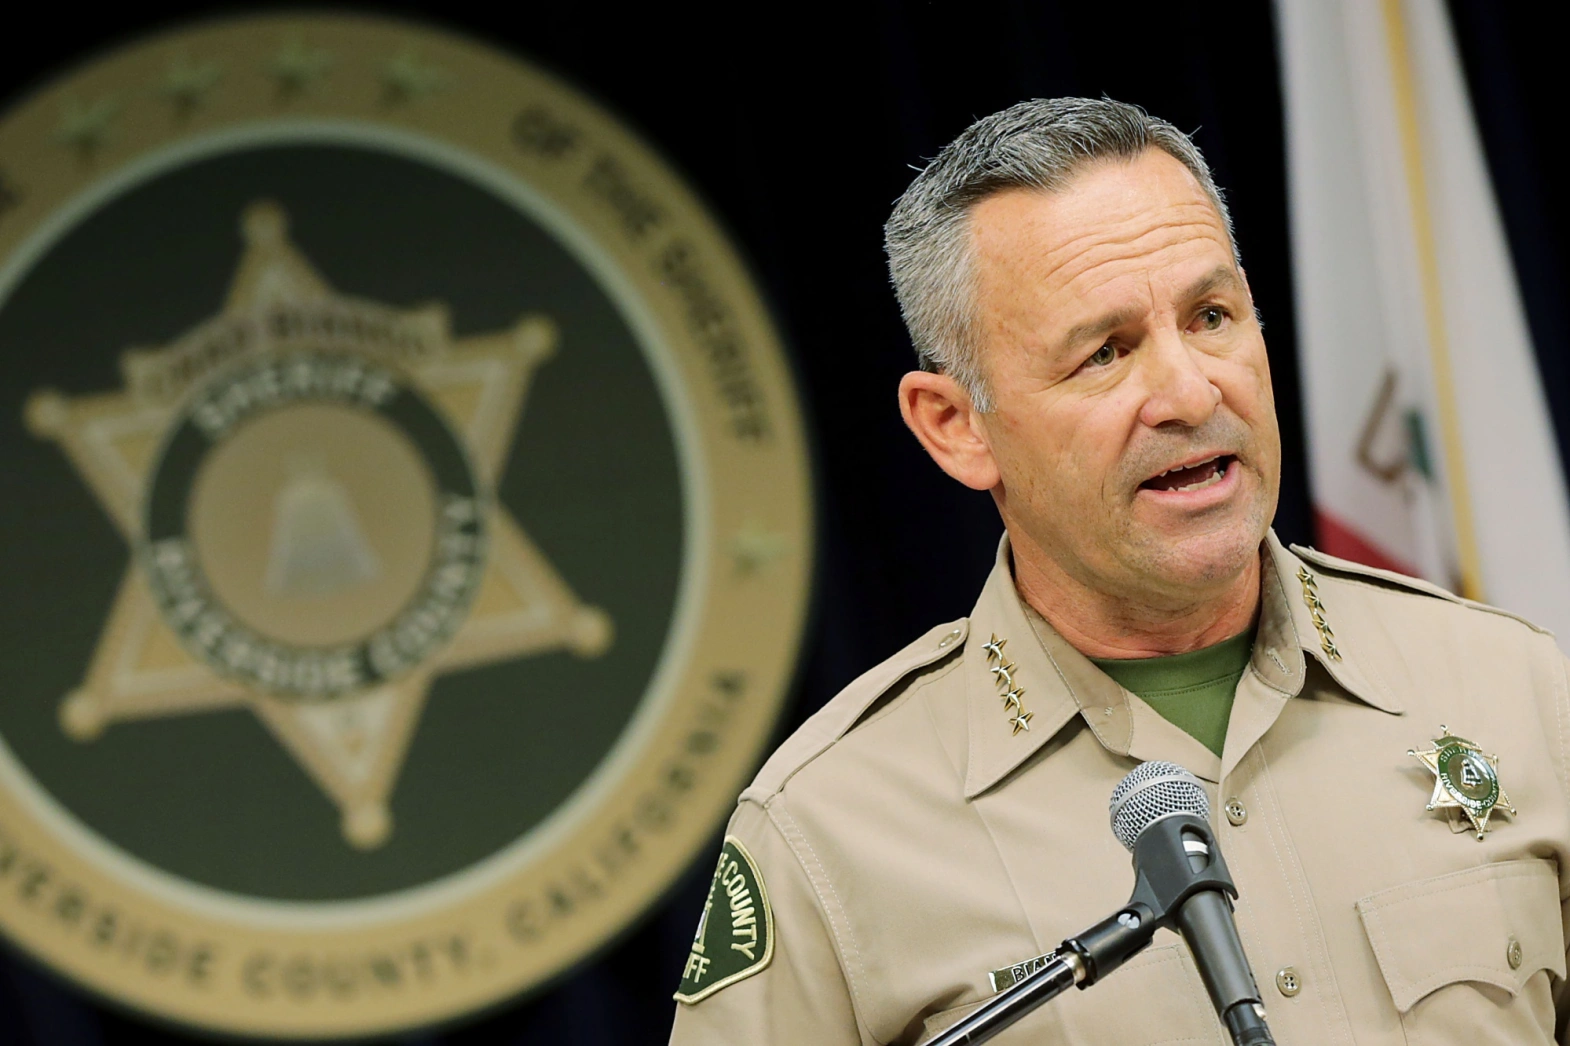 AG Bonta needs to investigate the Riverside County Sheriffs Department